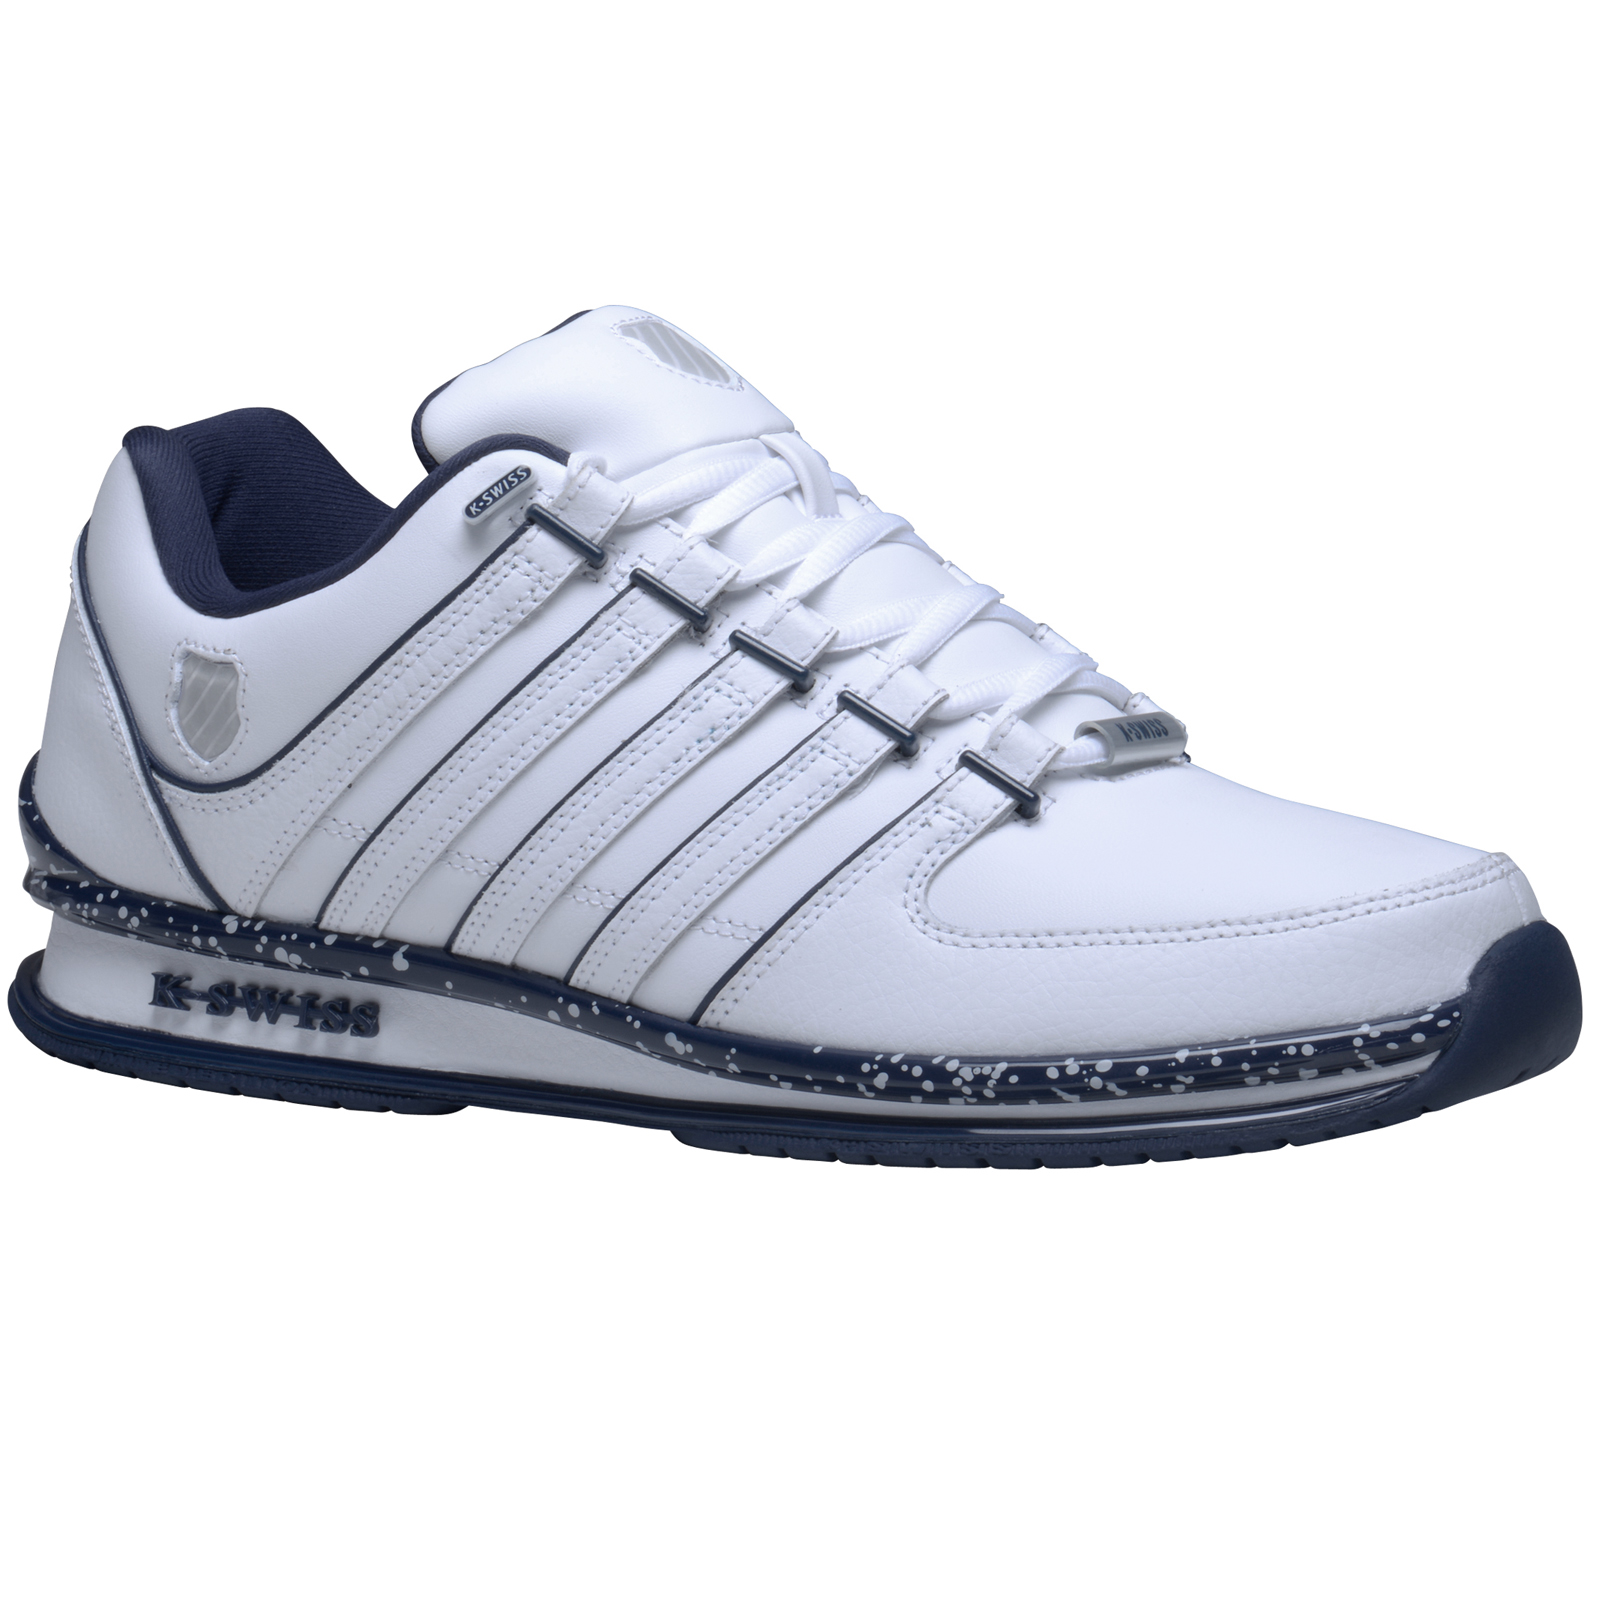 K-Swiss Rinzler SP Mens White Blue Trainer Limited Edition Lace Up ...